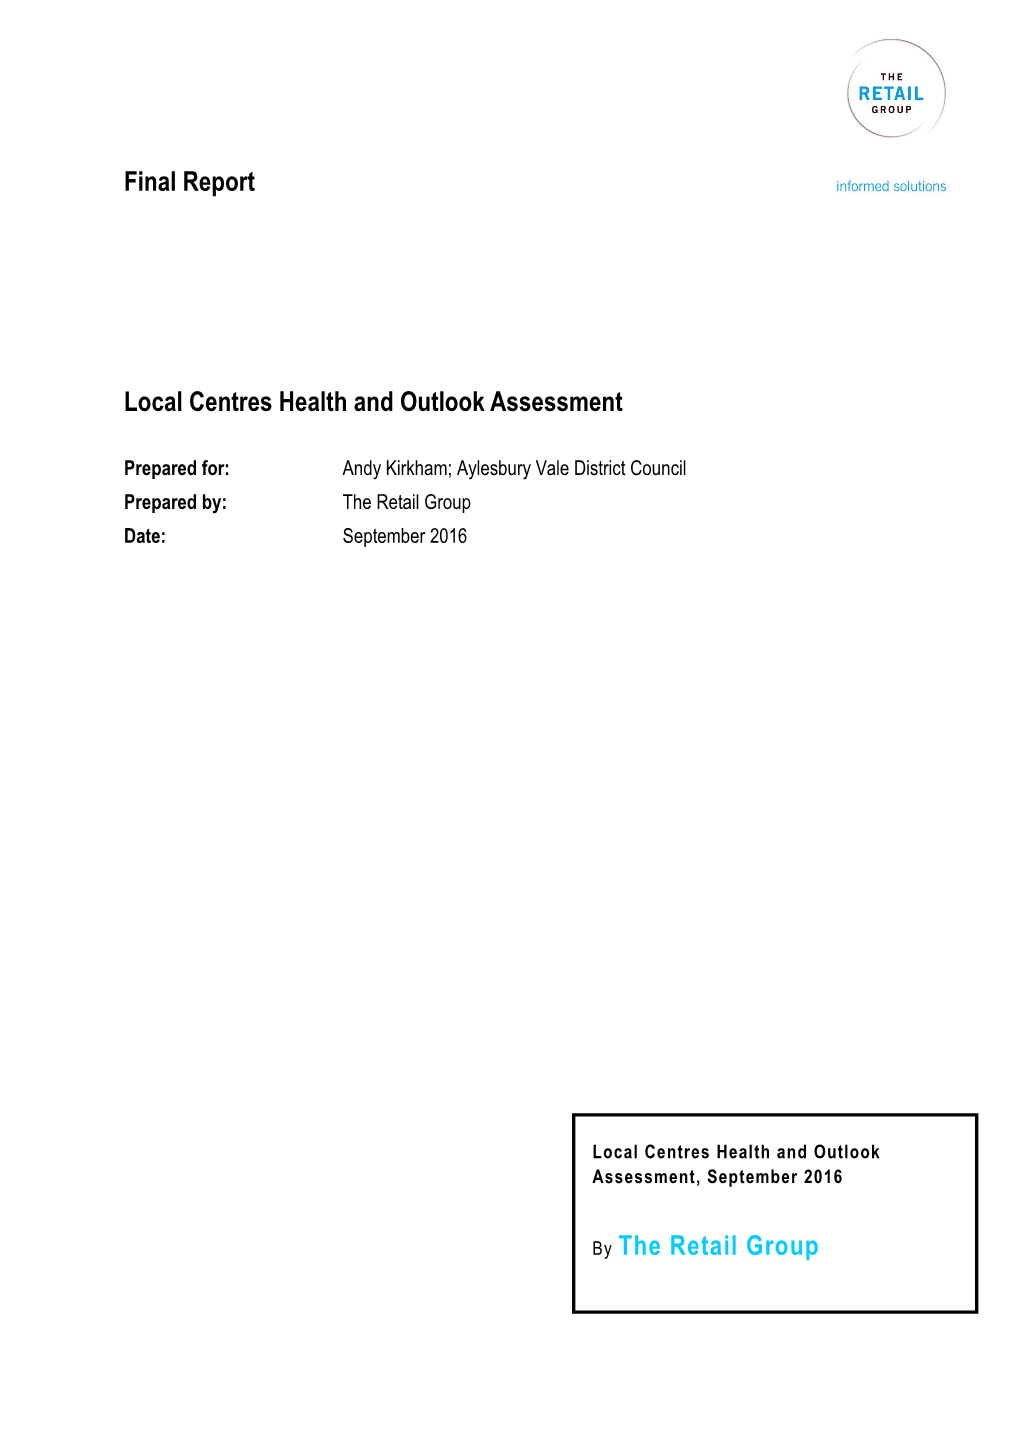 Final Report Local Centres Health and Outlook Assessment